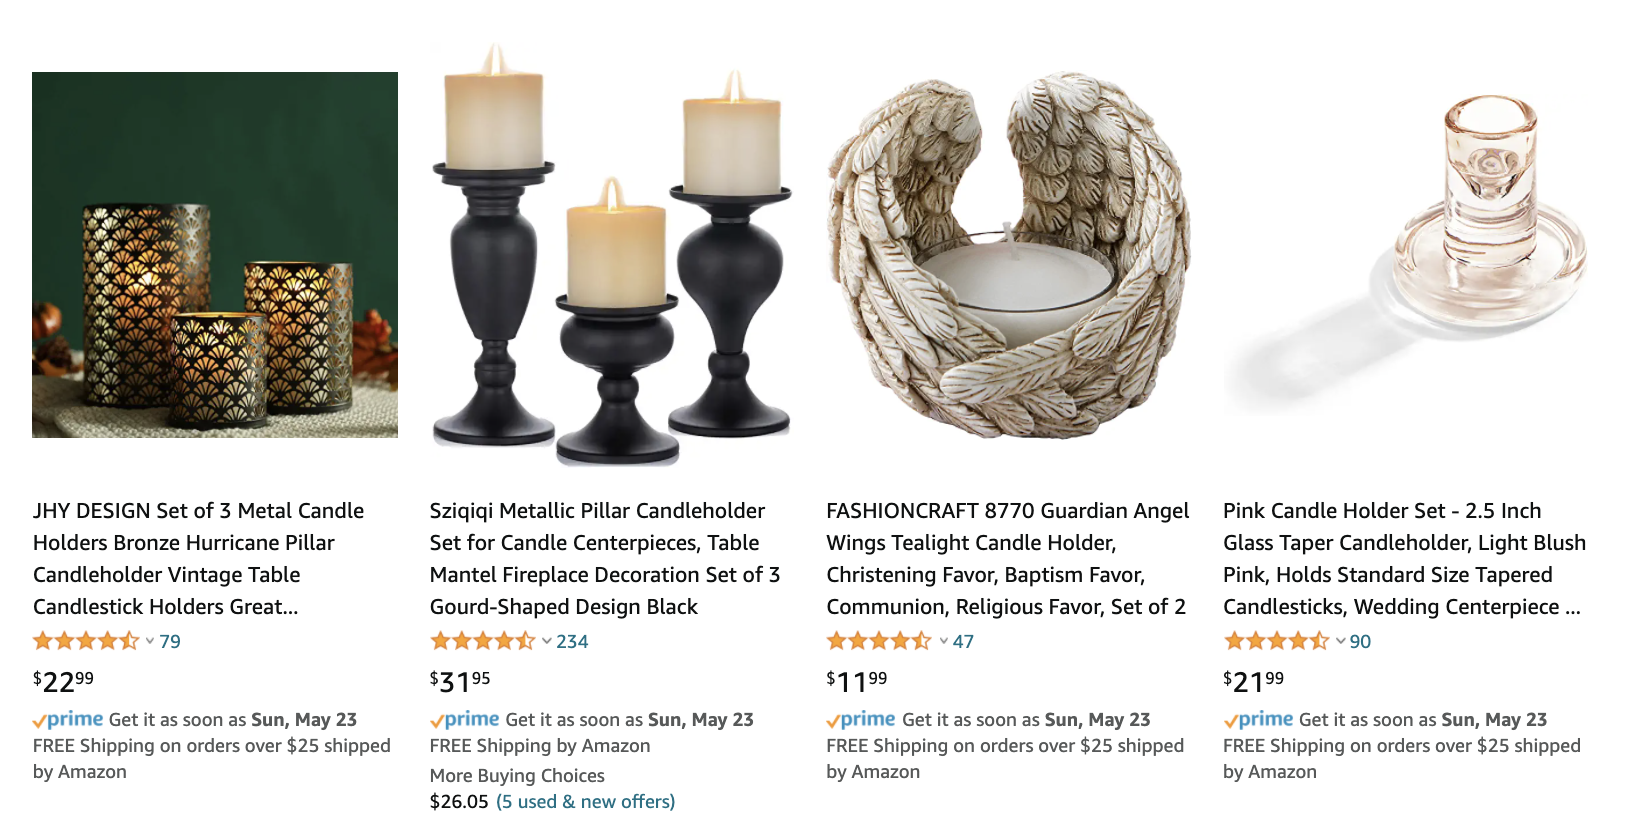 Amazon FBA product sourcing: listings for candles and candle holders